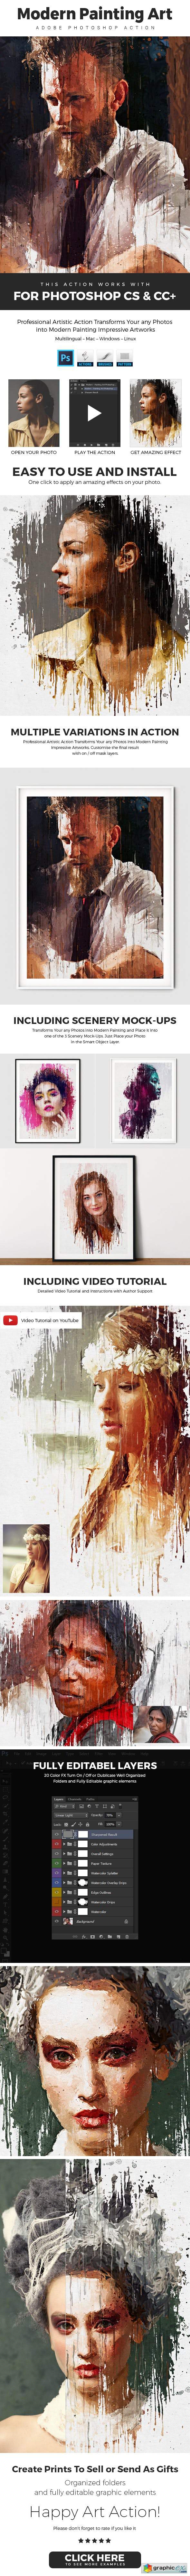 Modern - Painting Art Photoshop Action